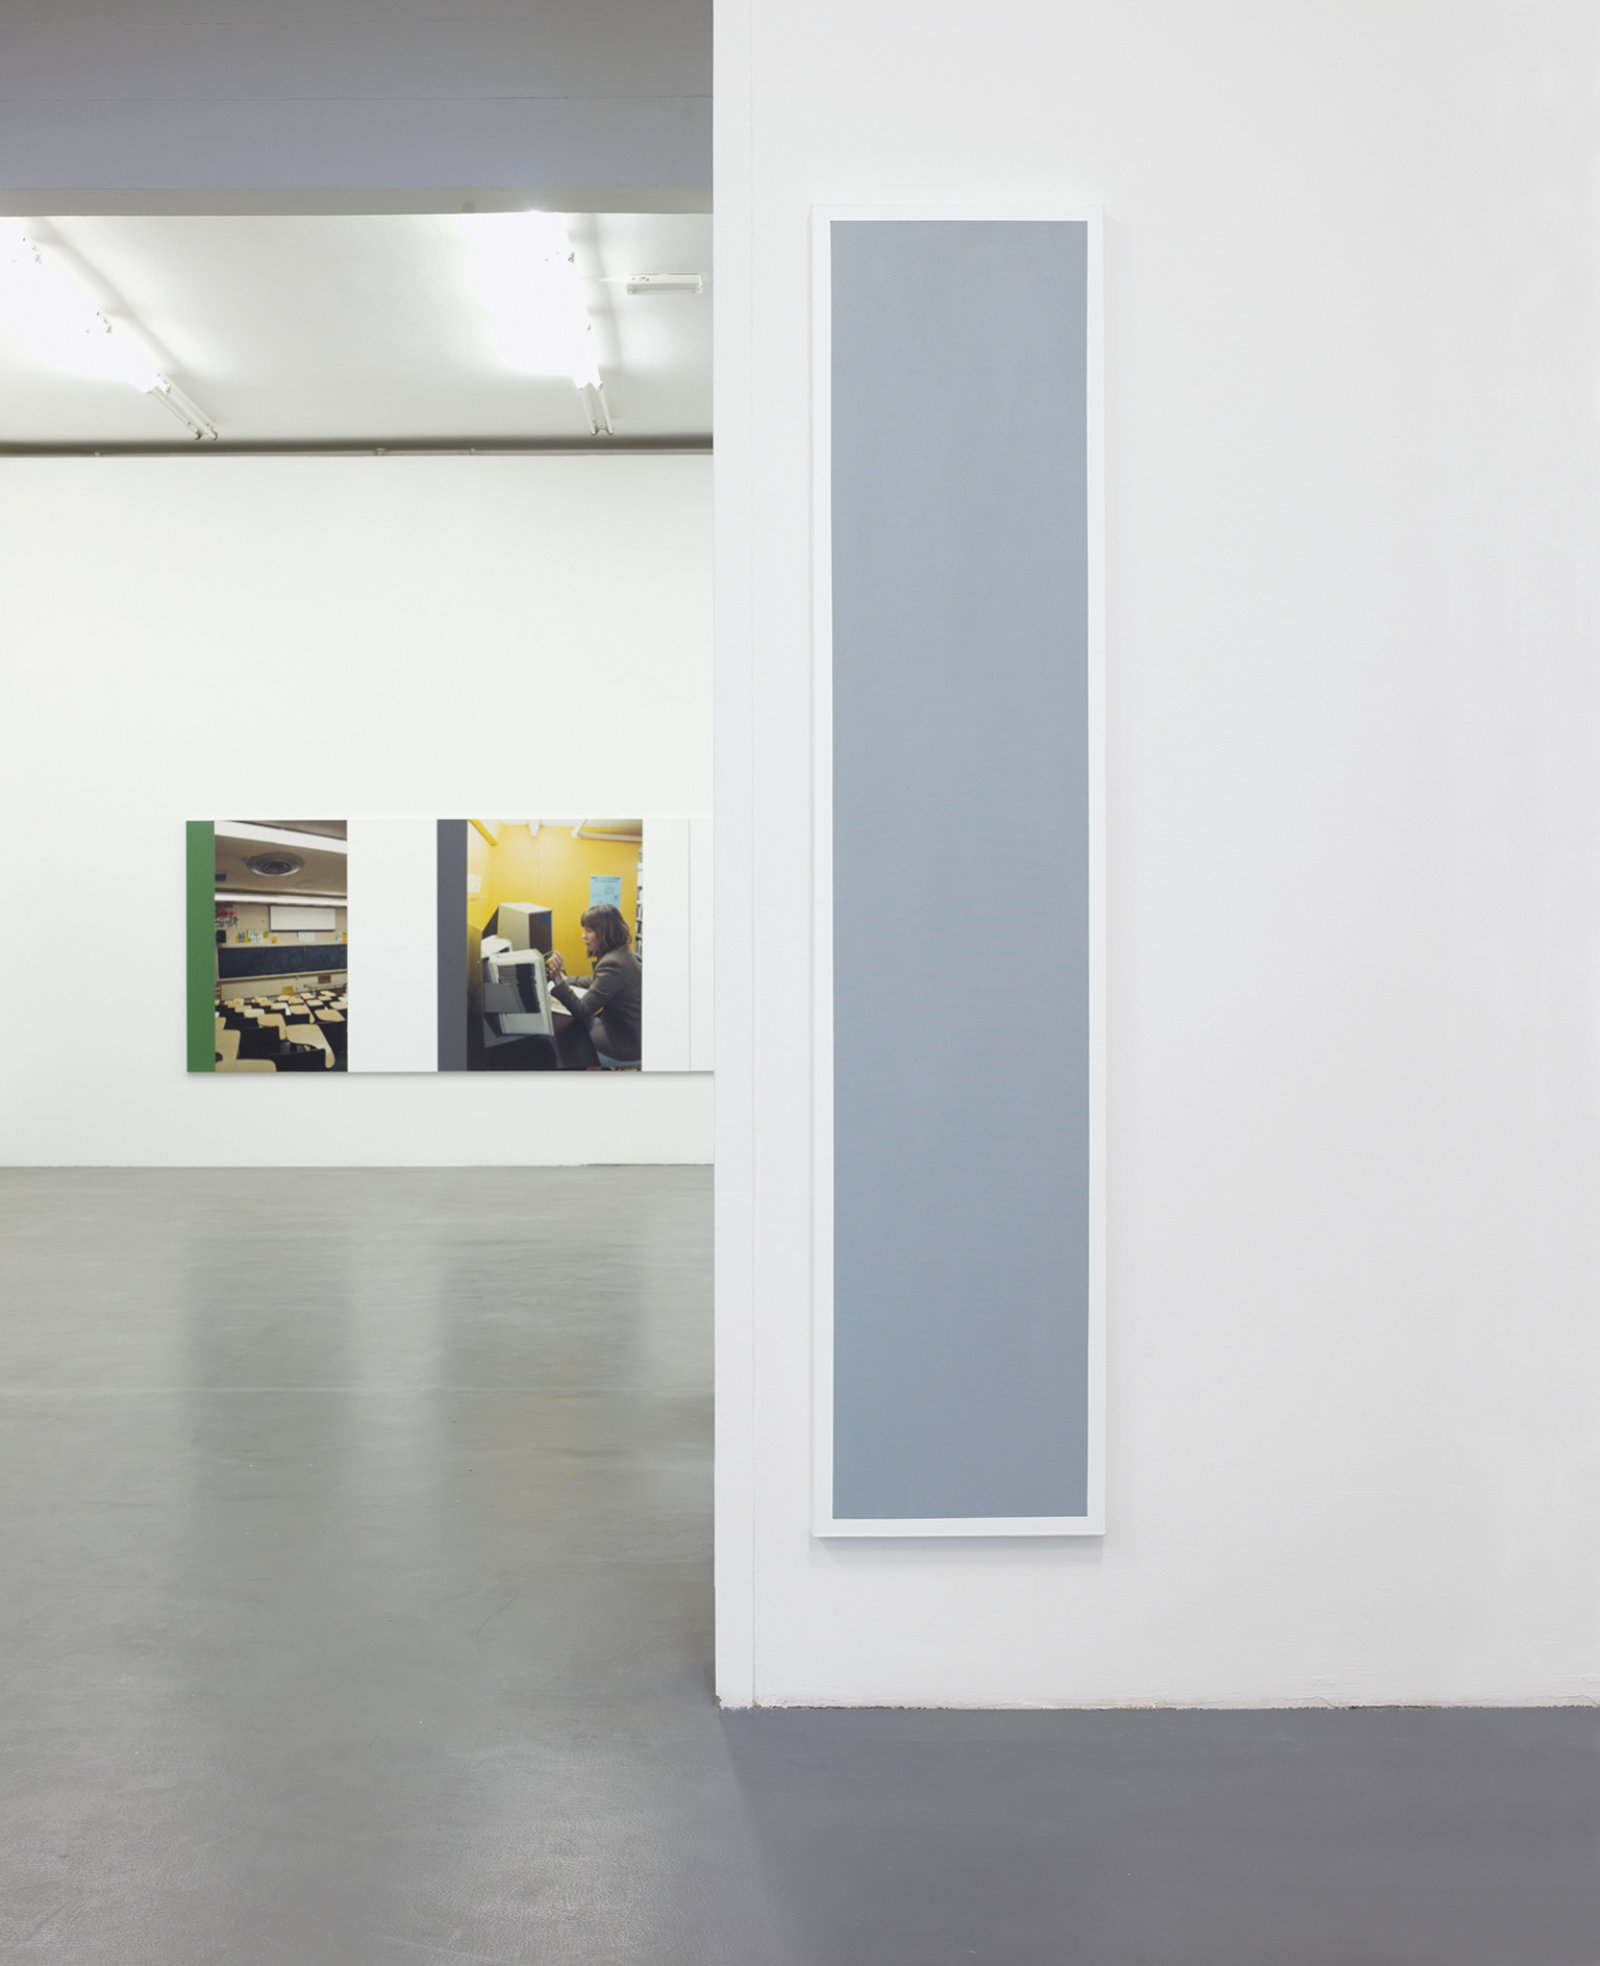 Ian Wallace, Untitled (Grey Monochrome with White), 1967–2008, acrylic on canvas, 90 x 20 in. (228 x 50 cm). Installation view, A Literature of Images, Witte de With, Rotterdam, 2008